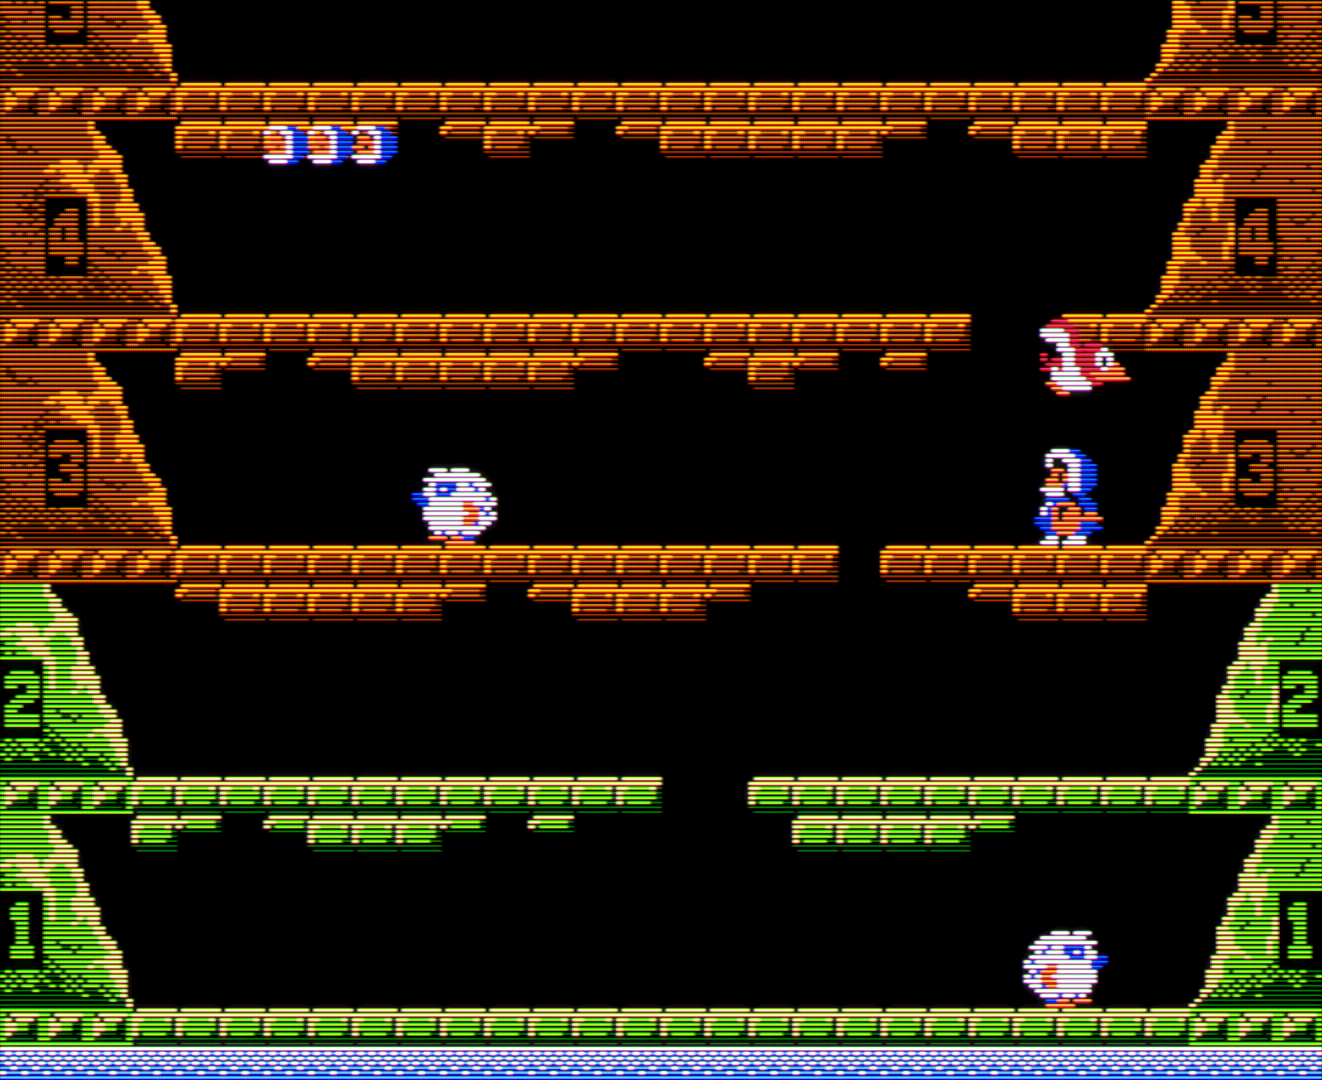 ice climber game with levels